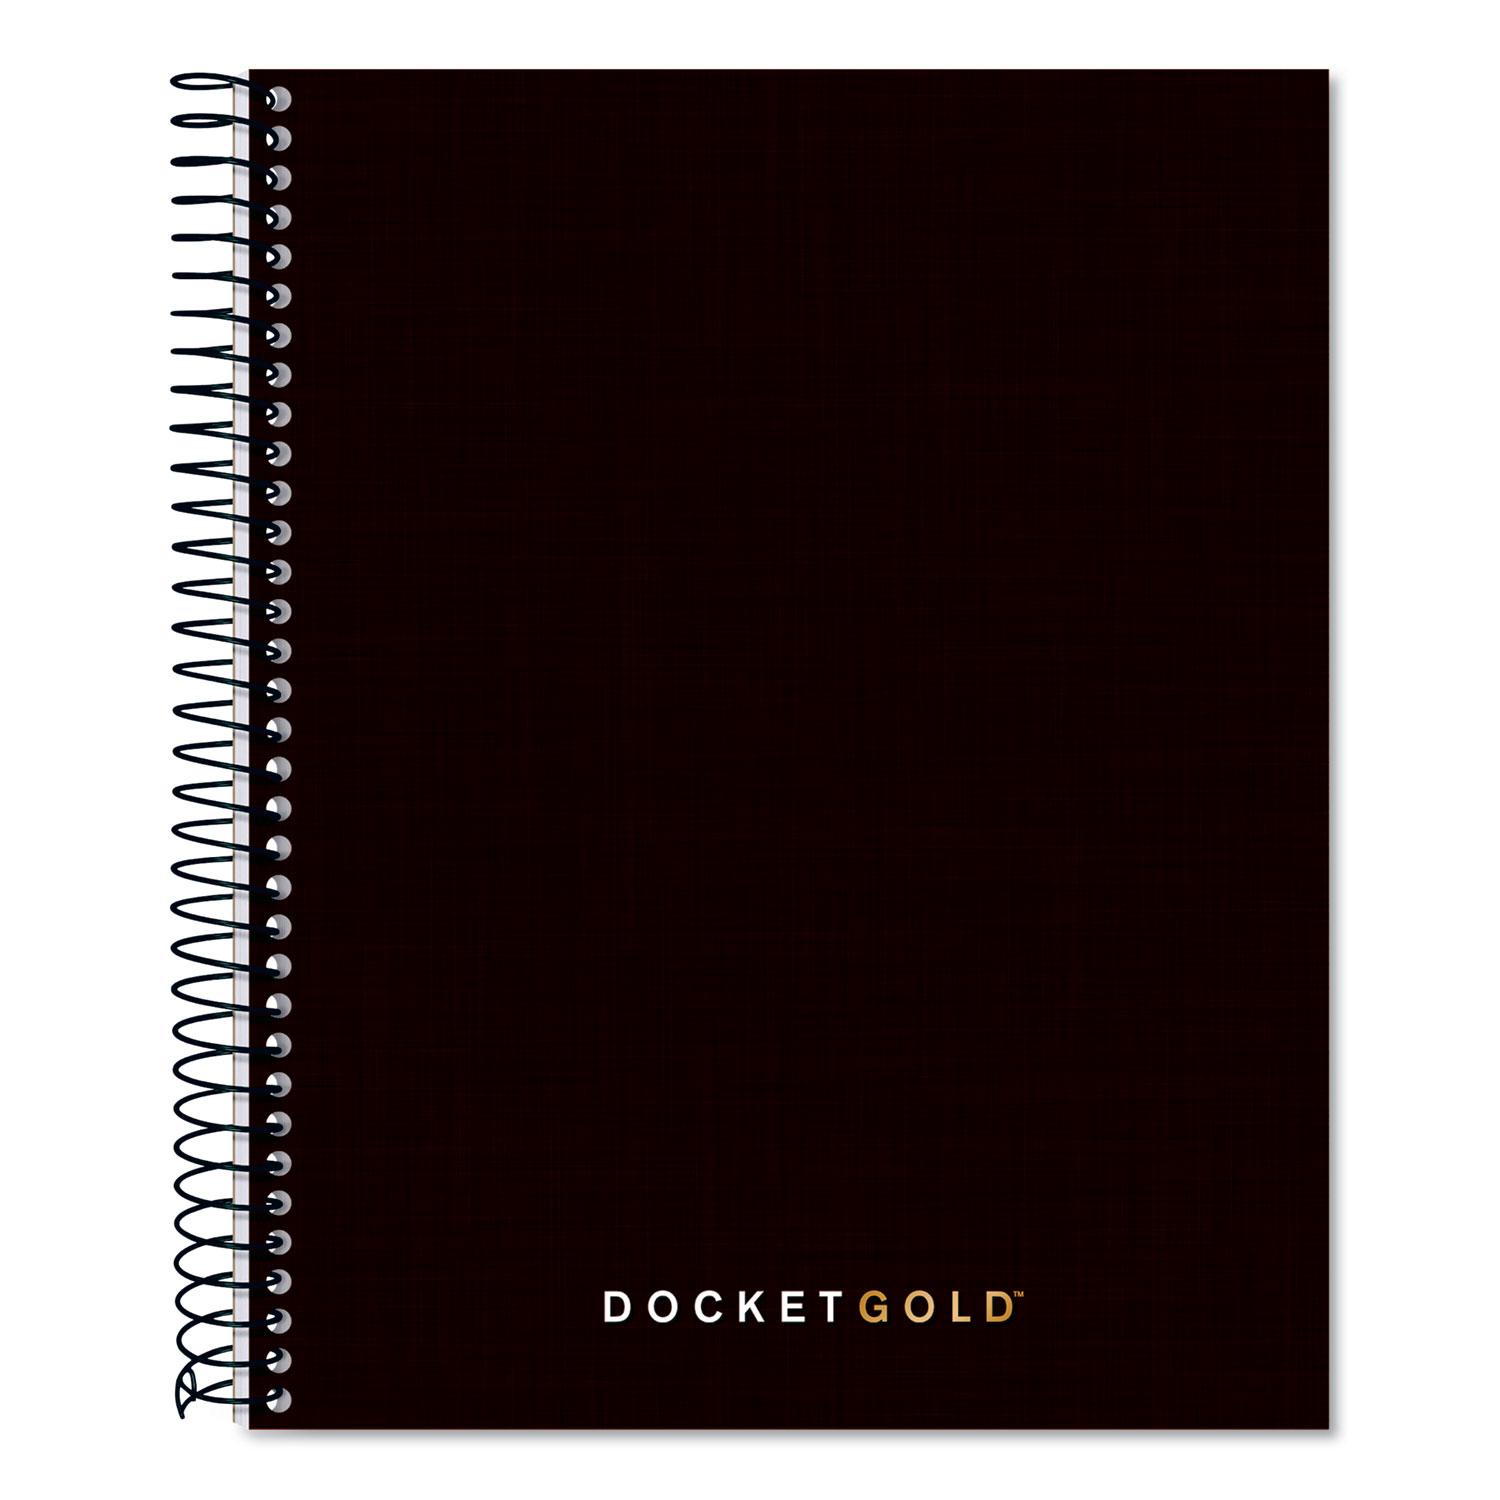  TOPS 63754 Docket Gold Planners & Project Planners, Narrow, Black, 8.5 x 6.75, 70 Sheets (TOP63754) 